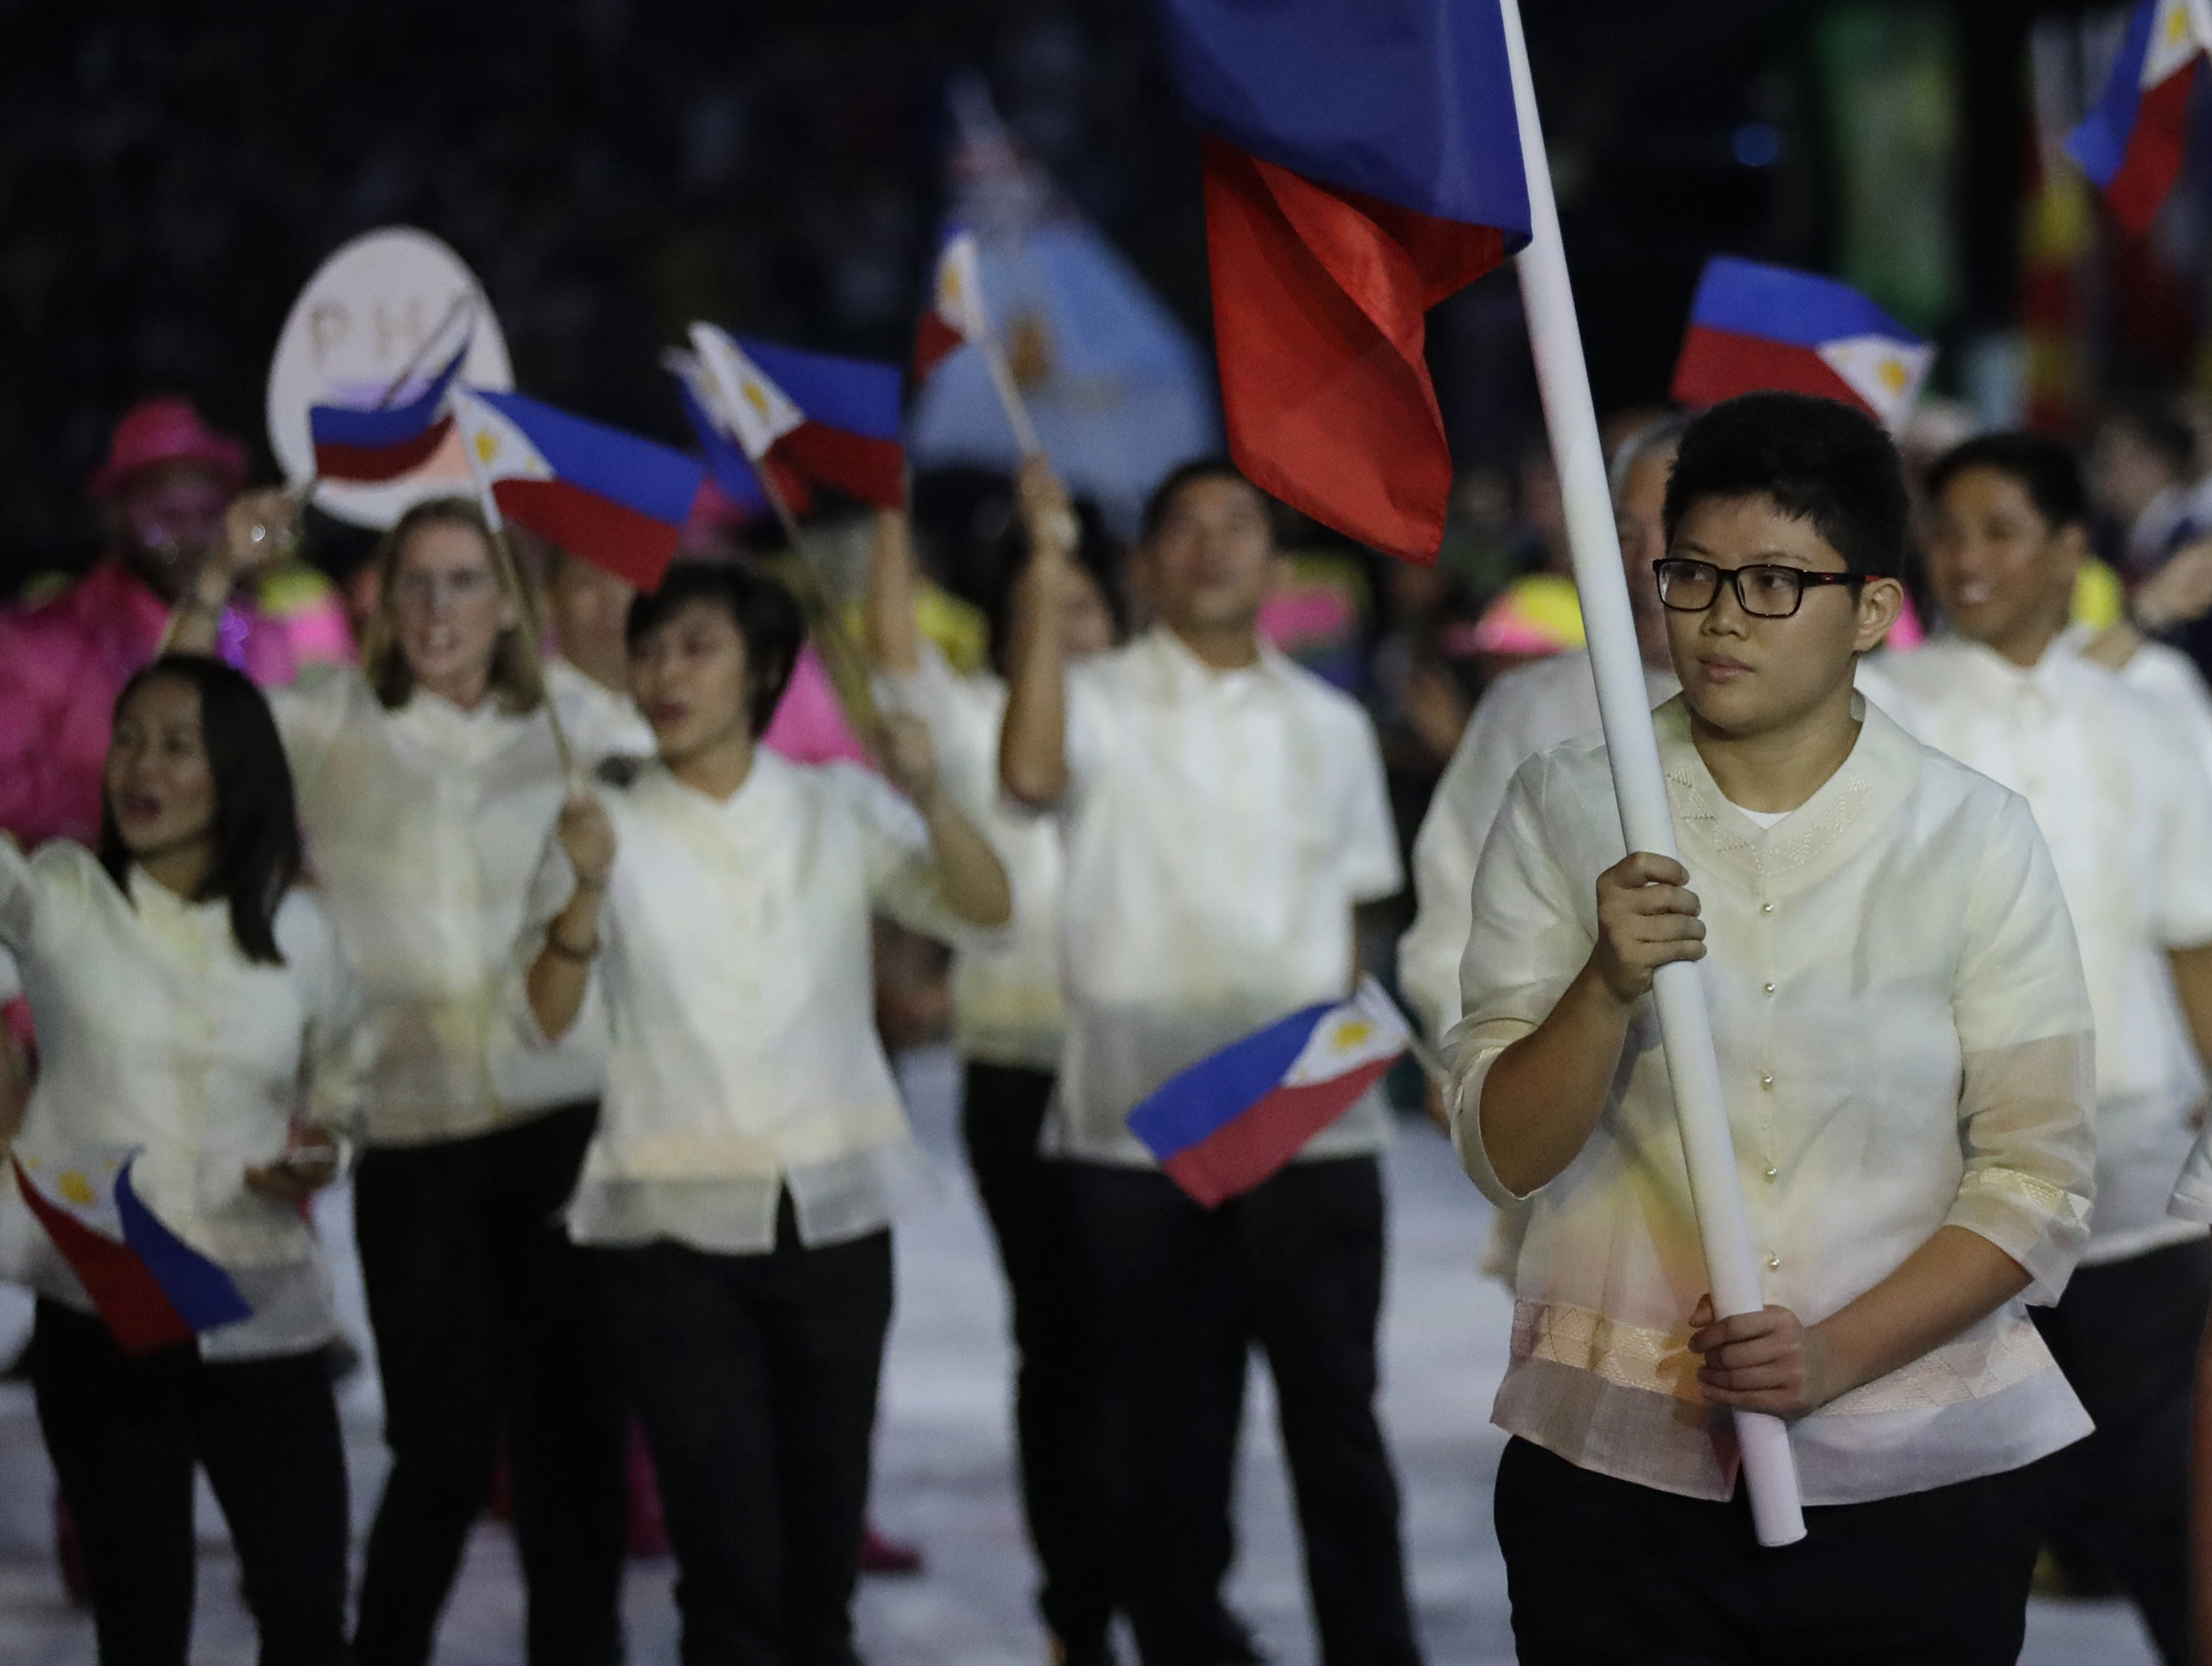 Ian Lariba carries the flag of the Philippines during the opening ceremony for the 2016 Summer Olympics in Rio de Janeiro, Brazil, Friday, Aug. 5, 2016. (AP Photo/David Goldman)